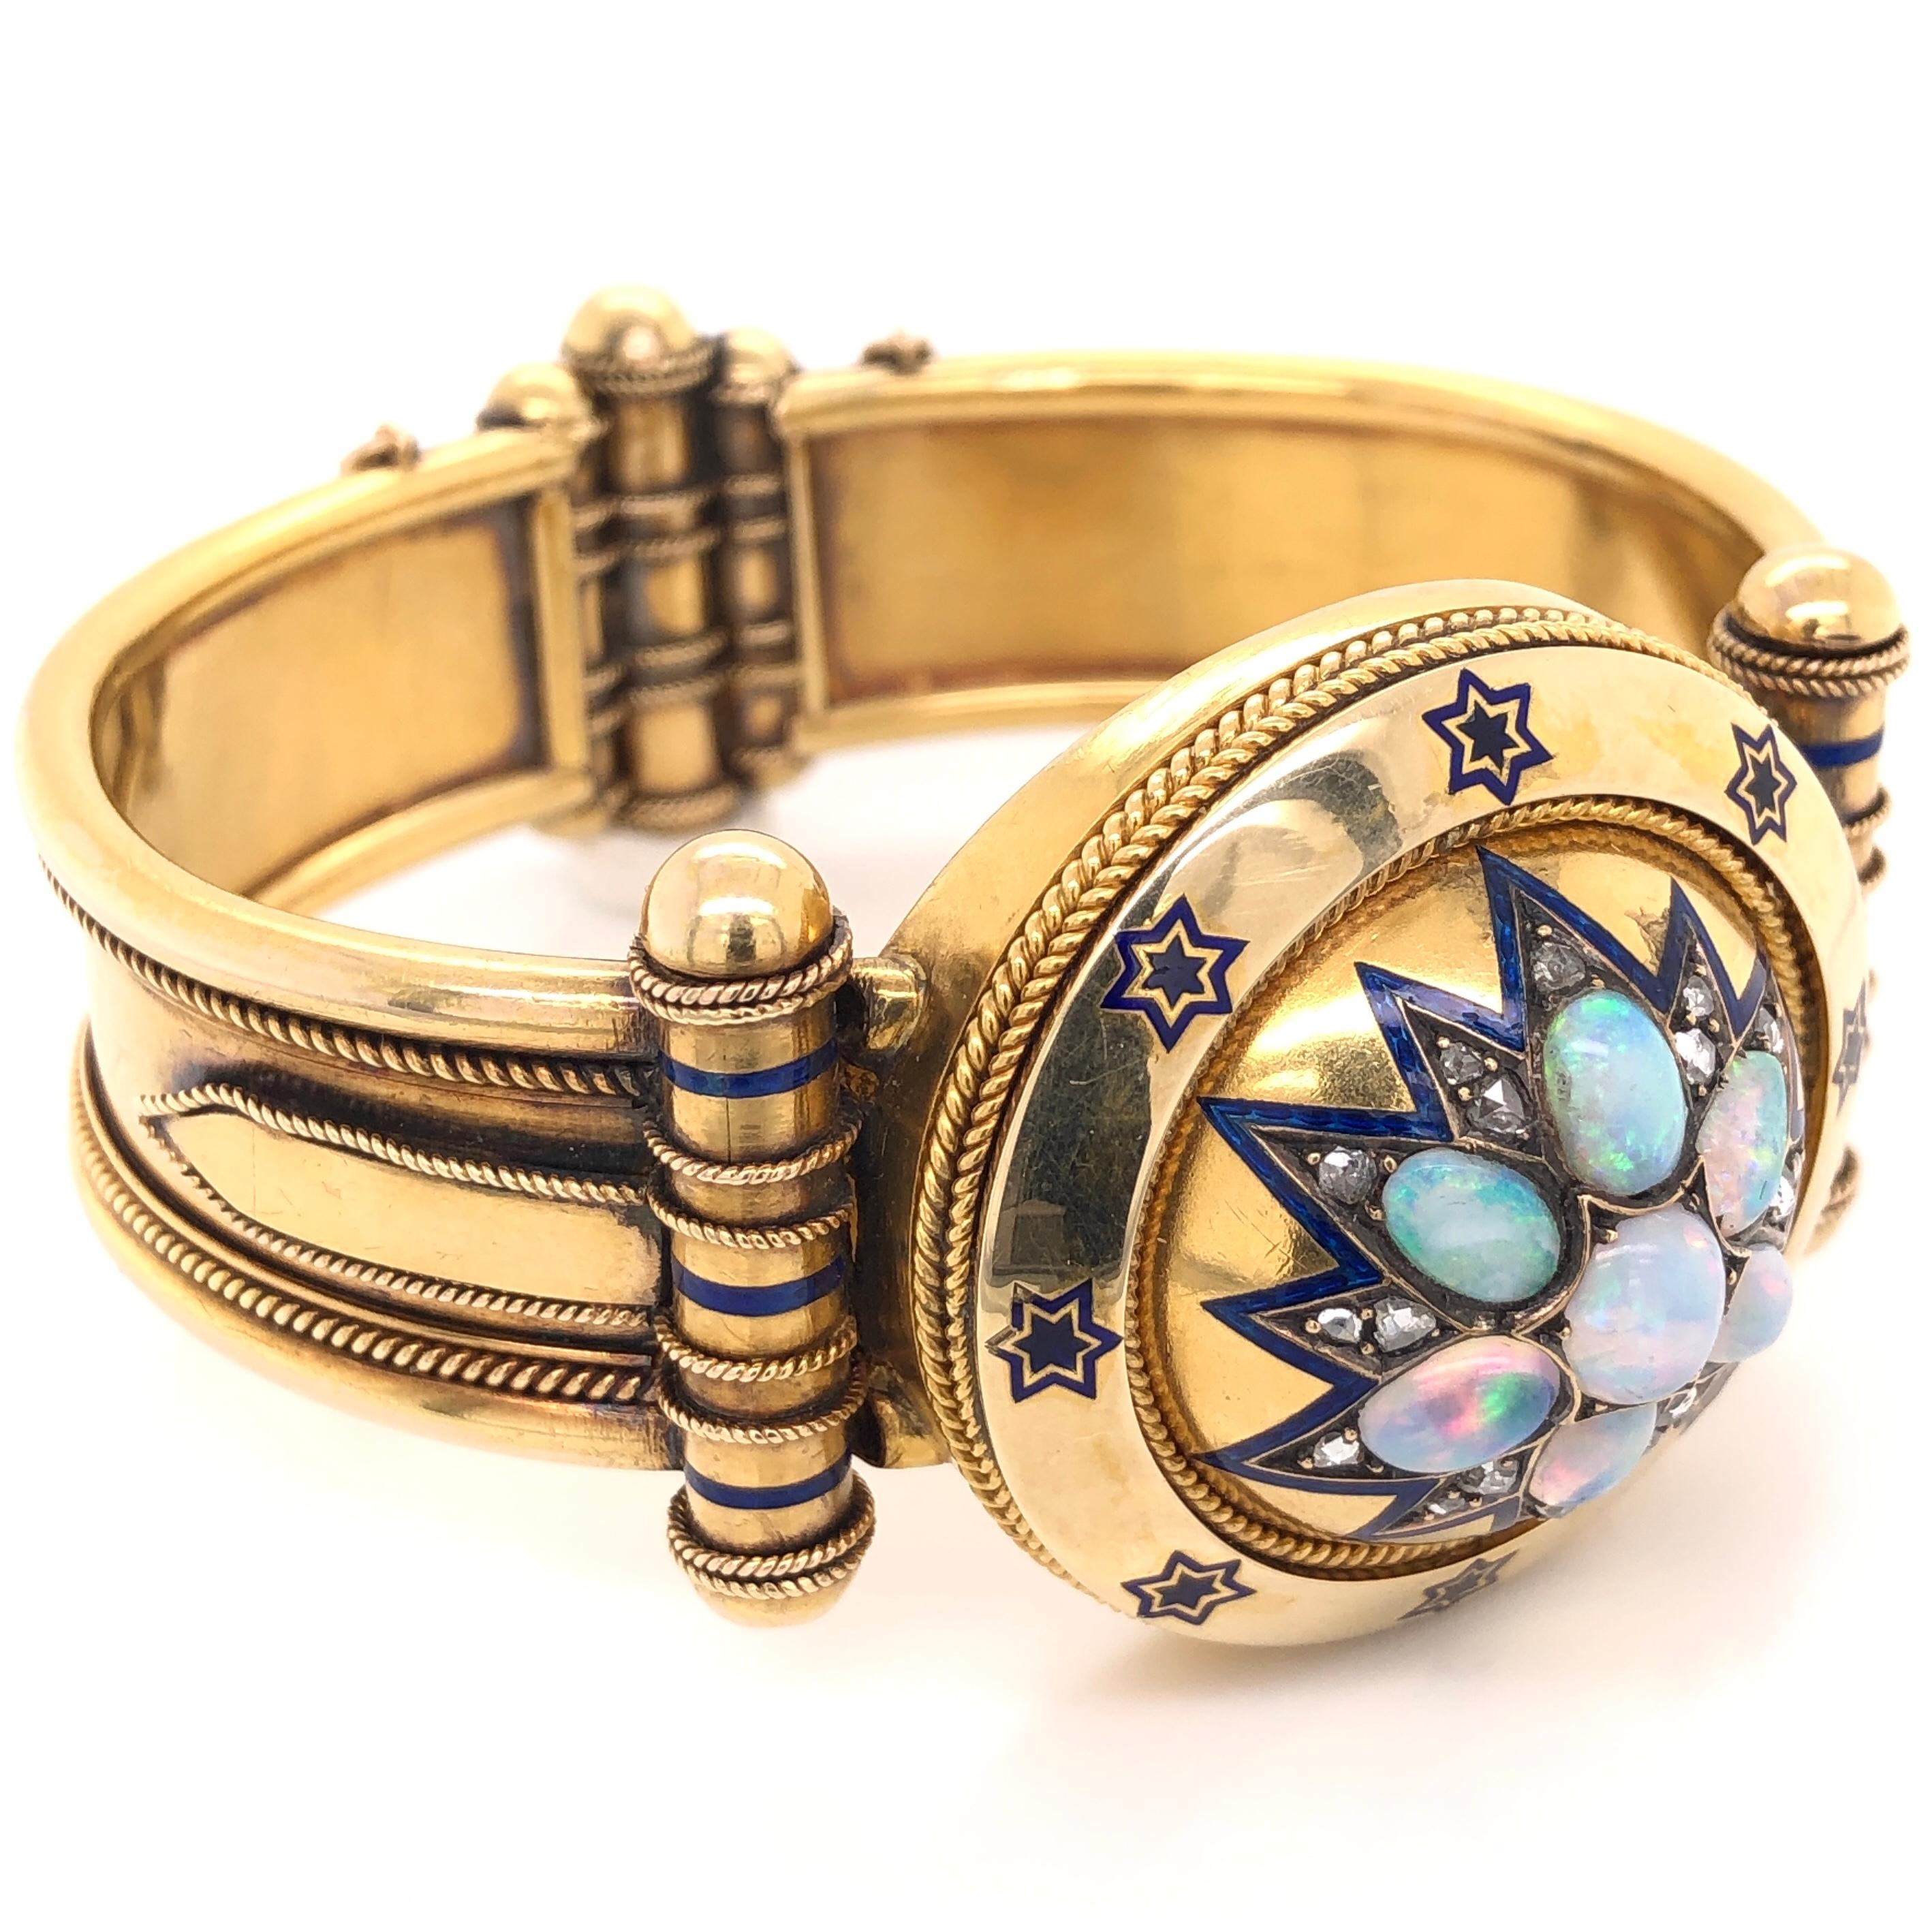 Simply Beautiful! Elegant and finely detailed Victorian Antique Opal, Diamond and Enamel Bangle Cuff Bracelet. Hand crafted in 18 Karat yellow Gold and set with opals, weighing approx. 2.20 total Carat weight and Diamonds, approx. 0.70 total Carat